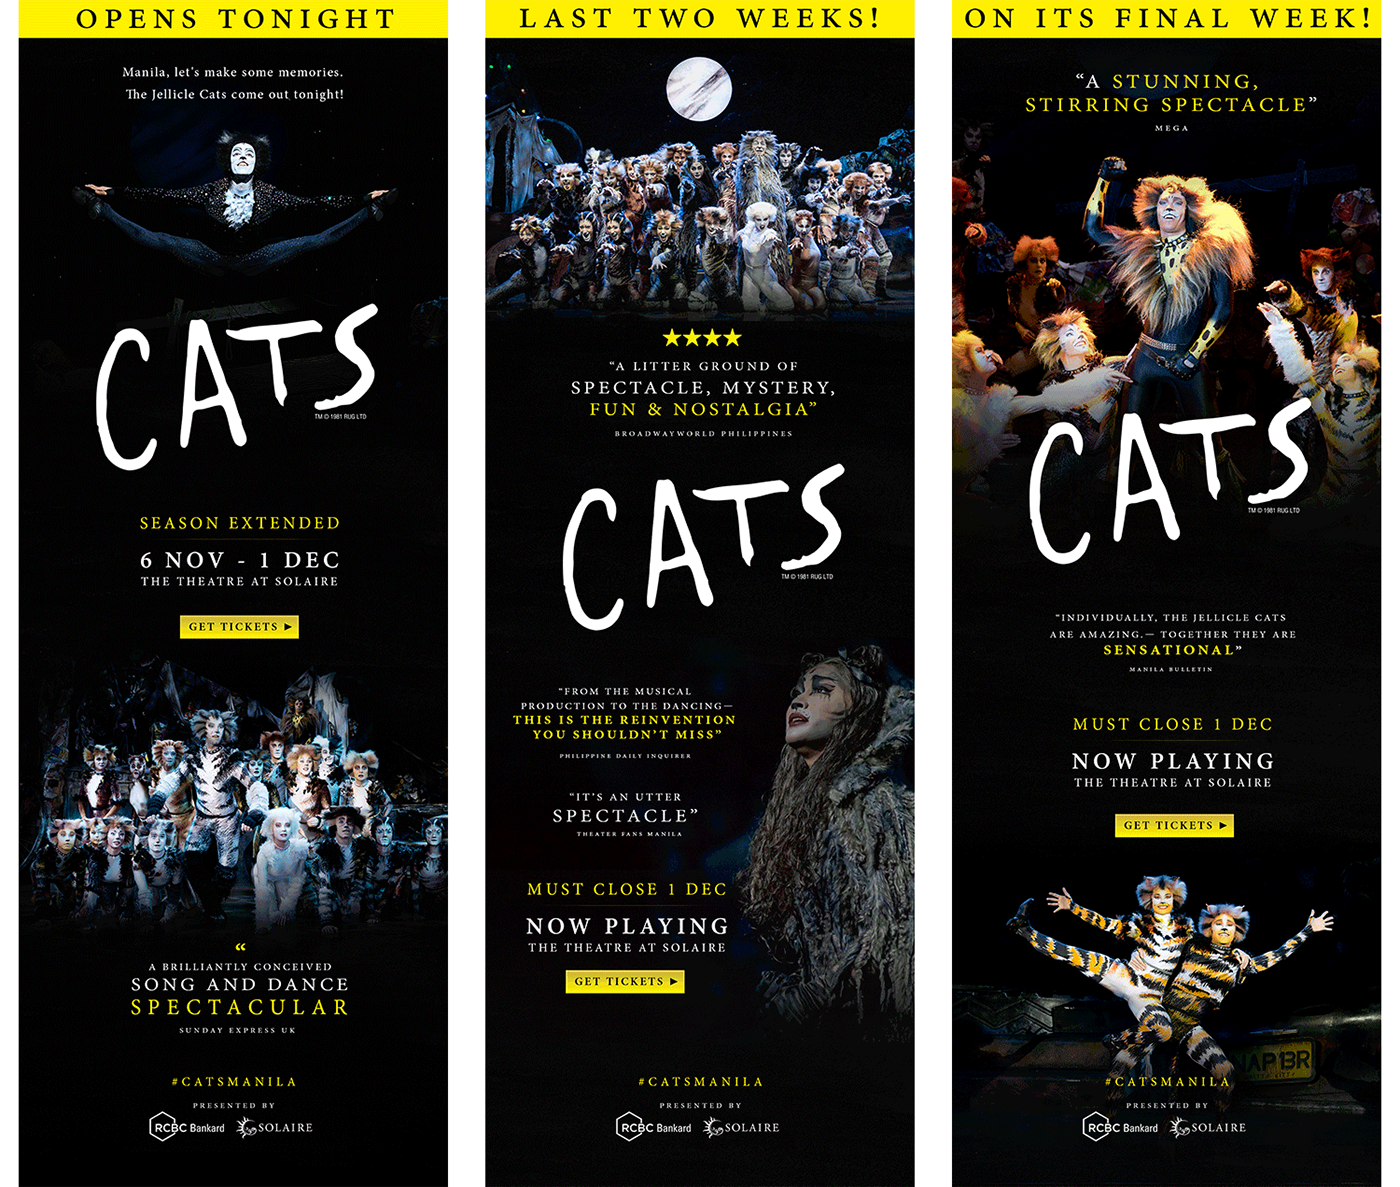 branding  broadway cats the musical digital branding Matilda the Musical musical theater social media theater  Theatre west end